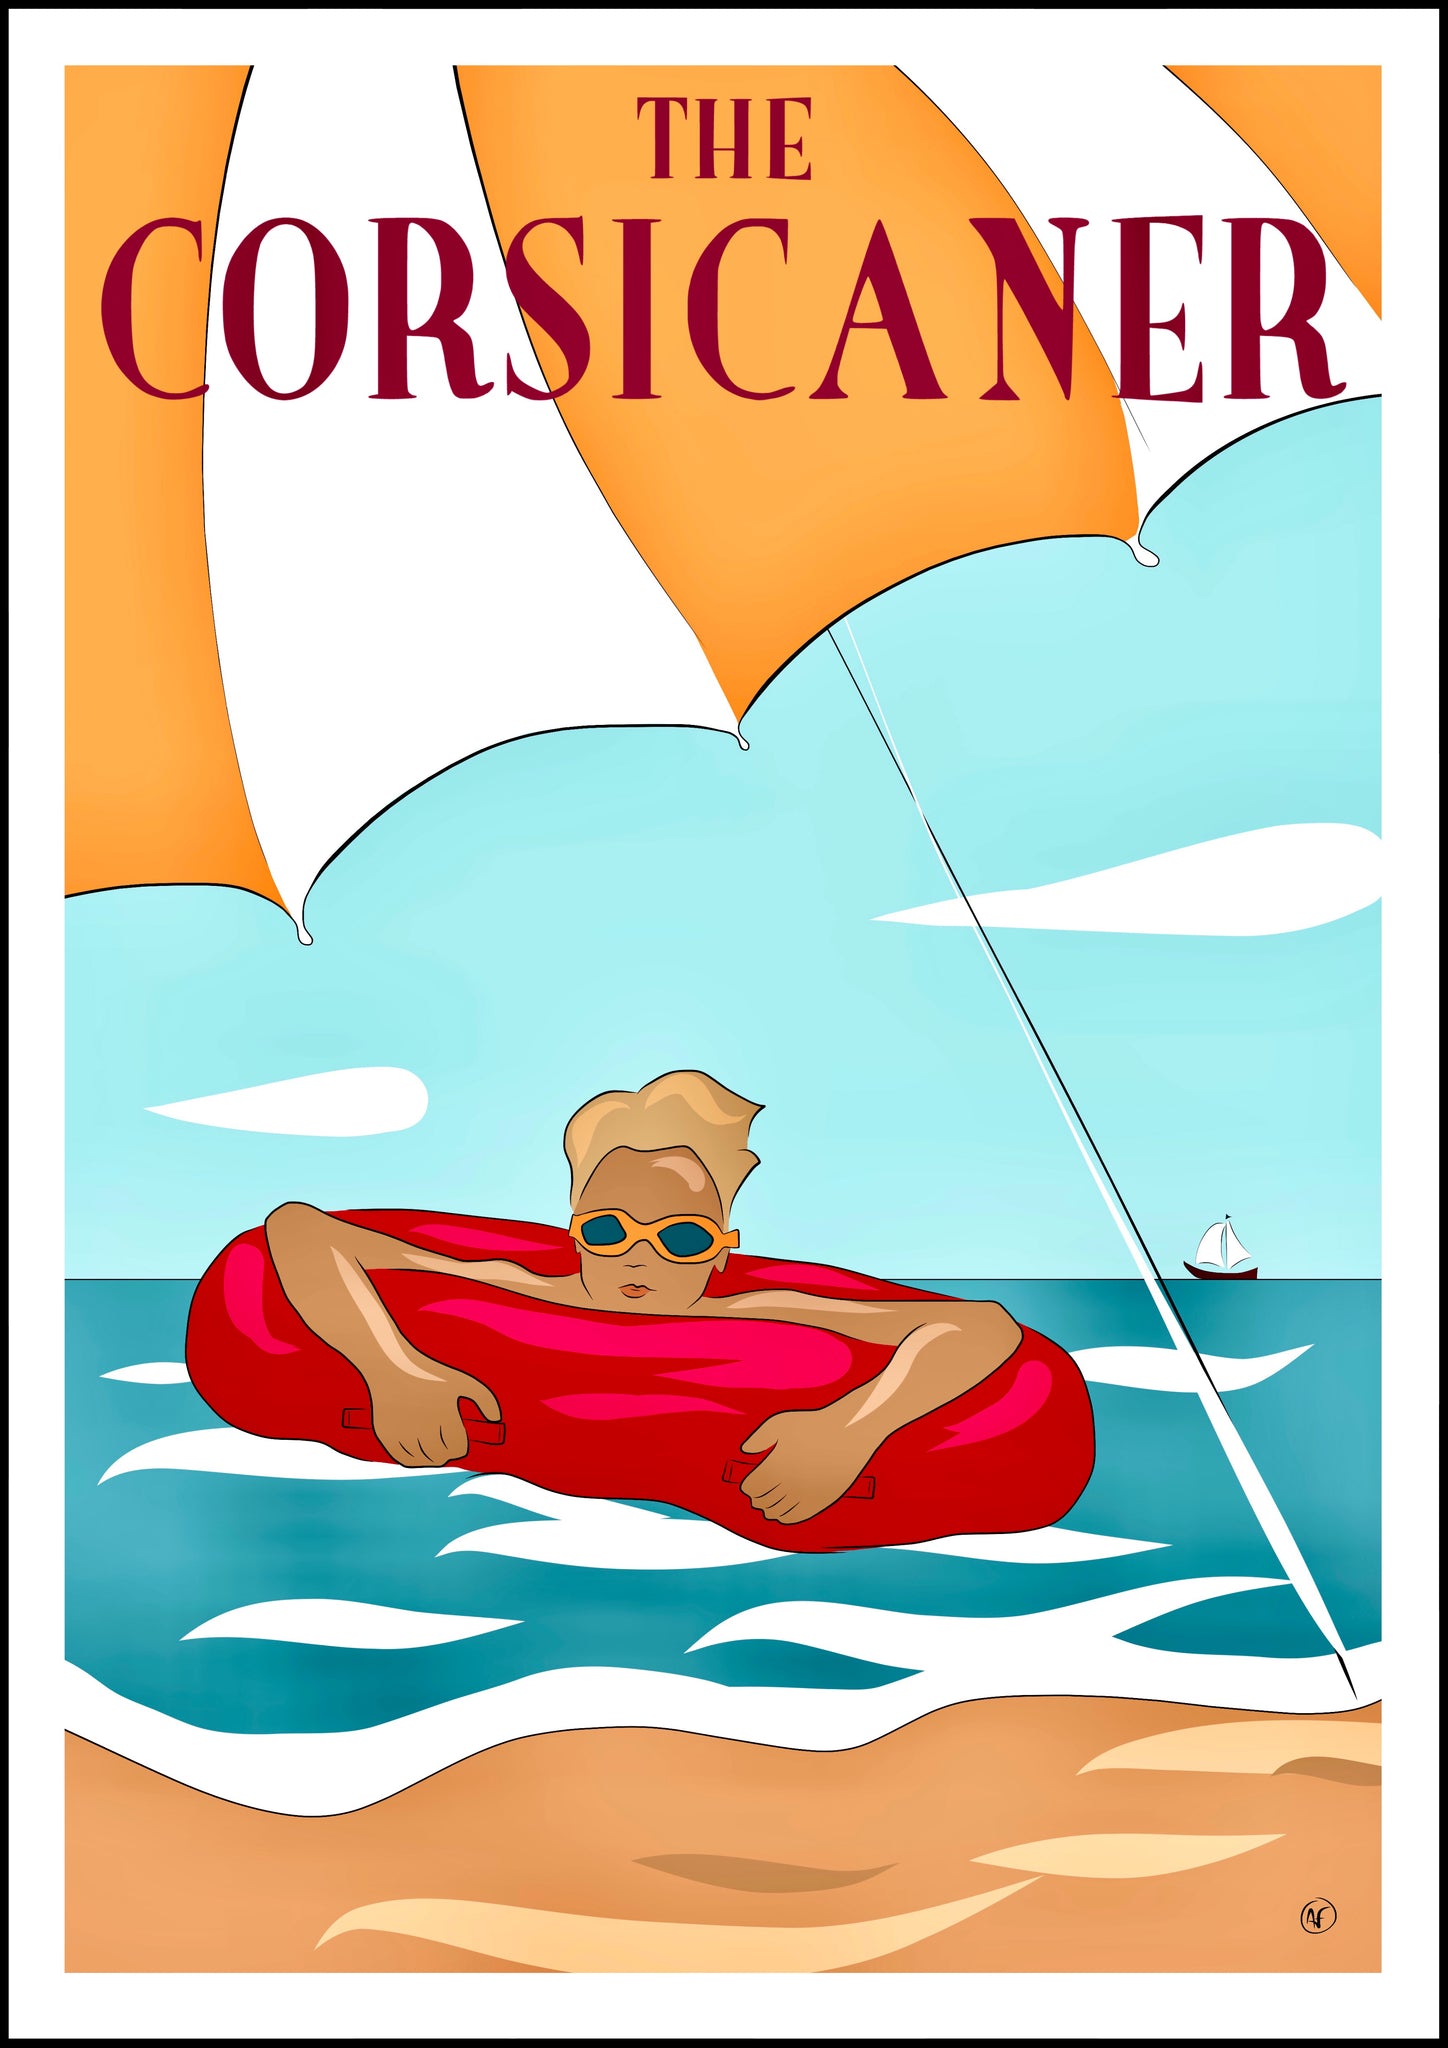 Art print THE CORSICANER, limited edition on fine art paper, boy at the beach, beach life, summer vibes , travel poster, perfect gift, illustration by Anne F.